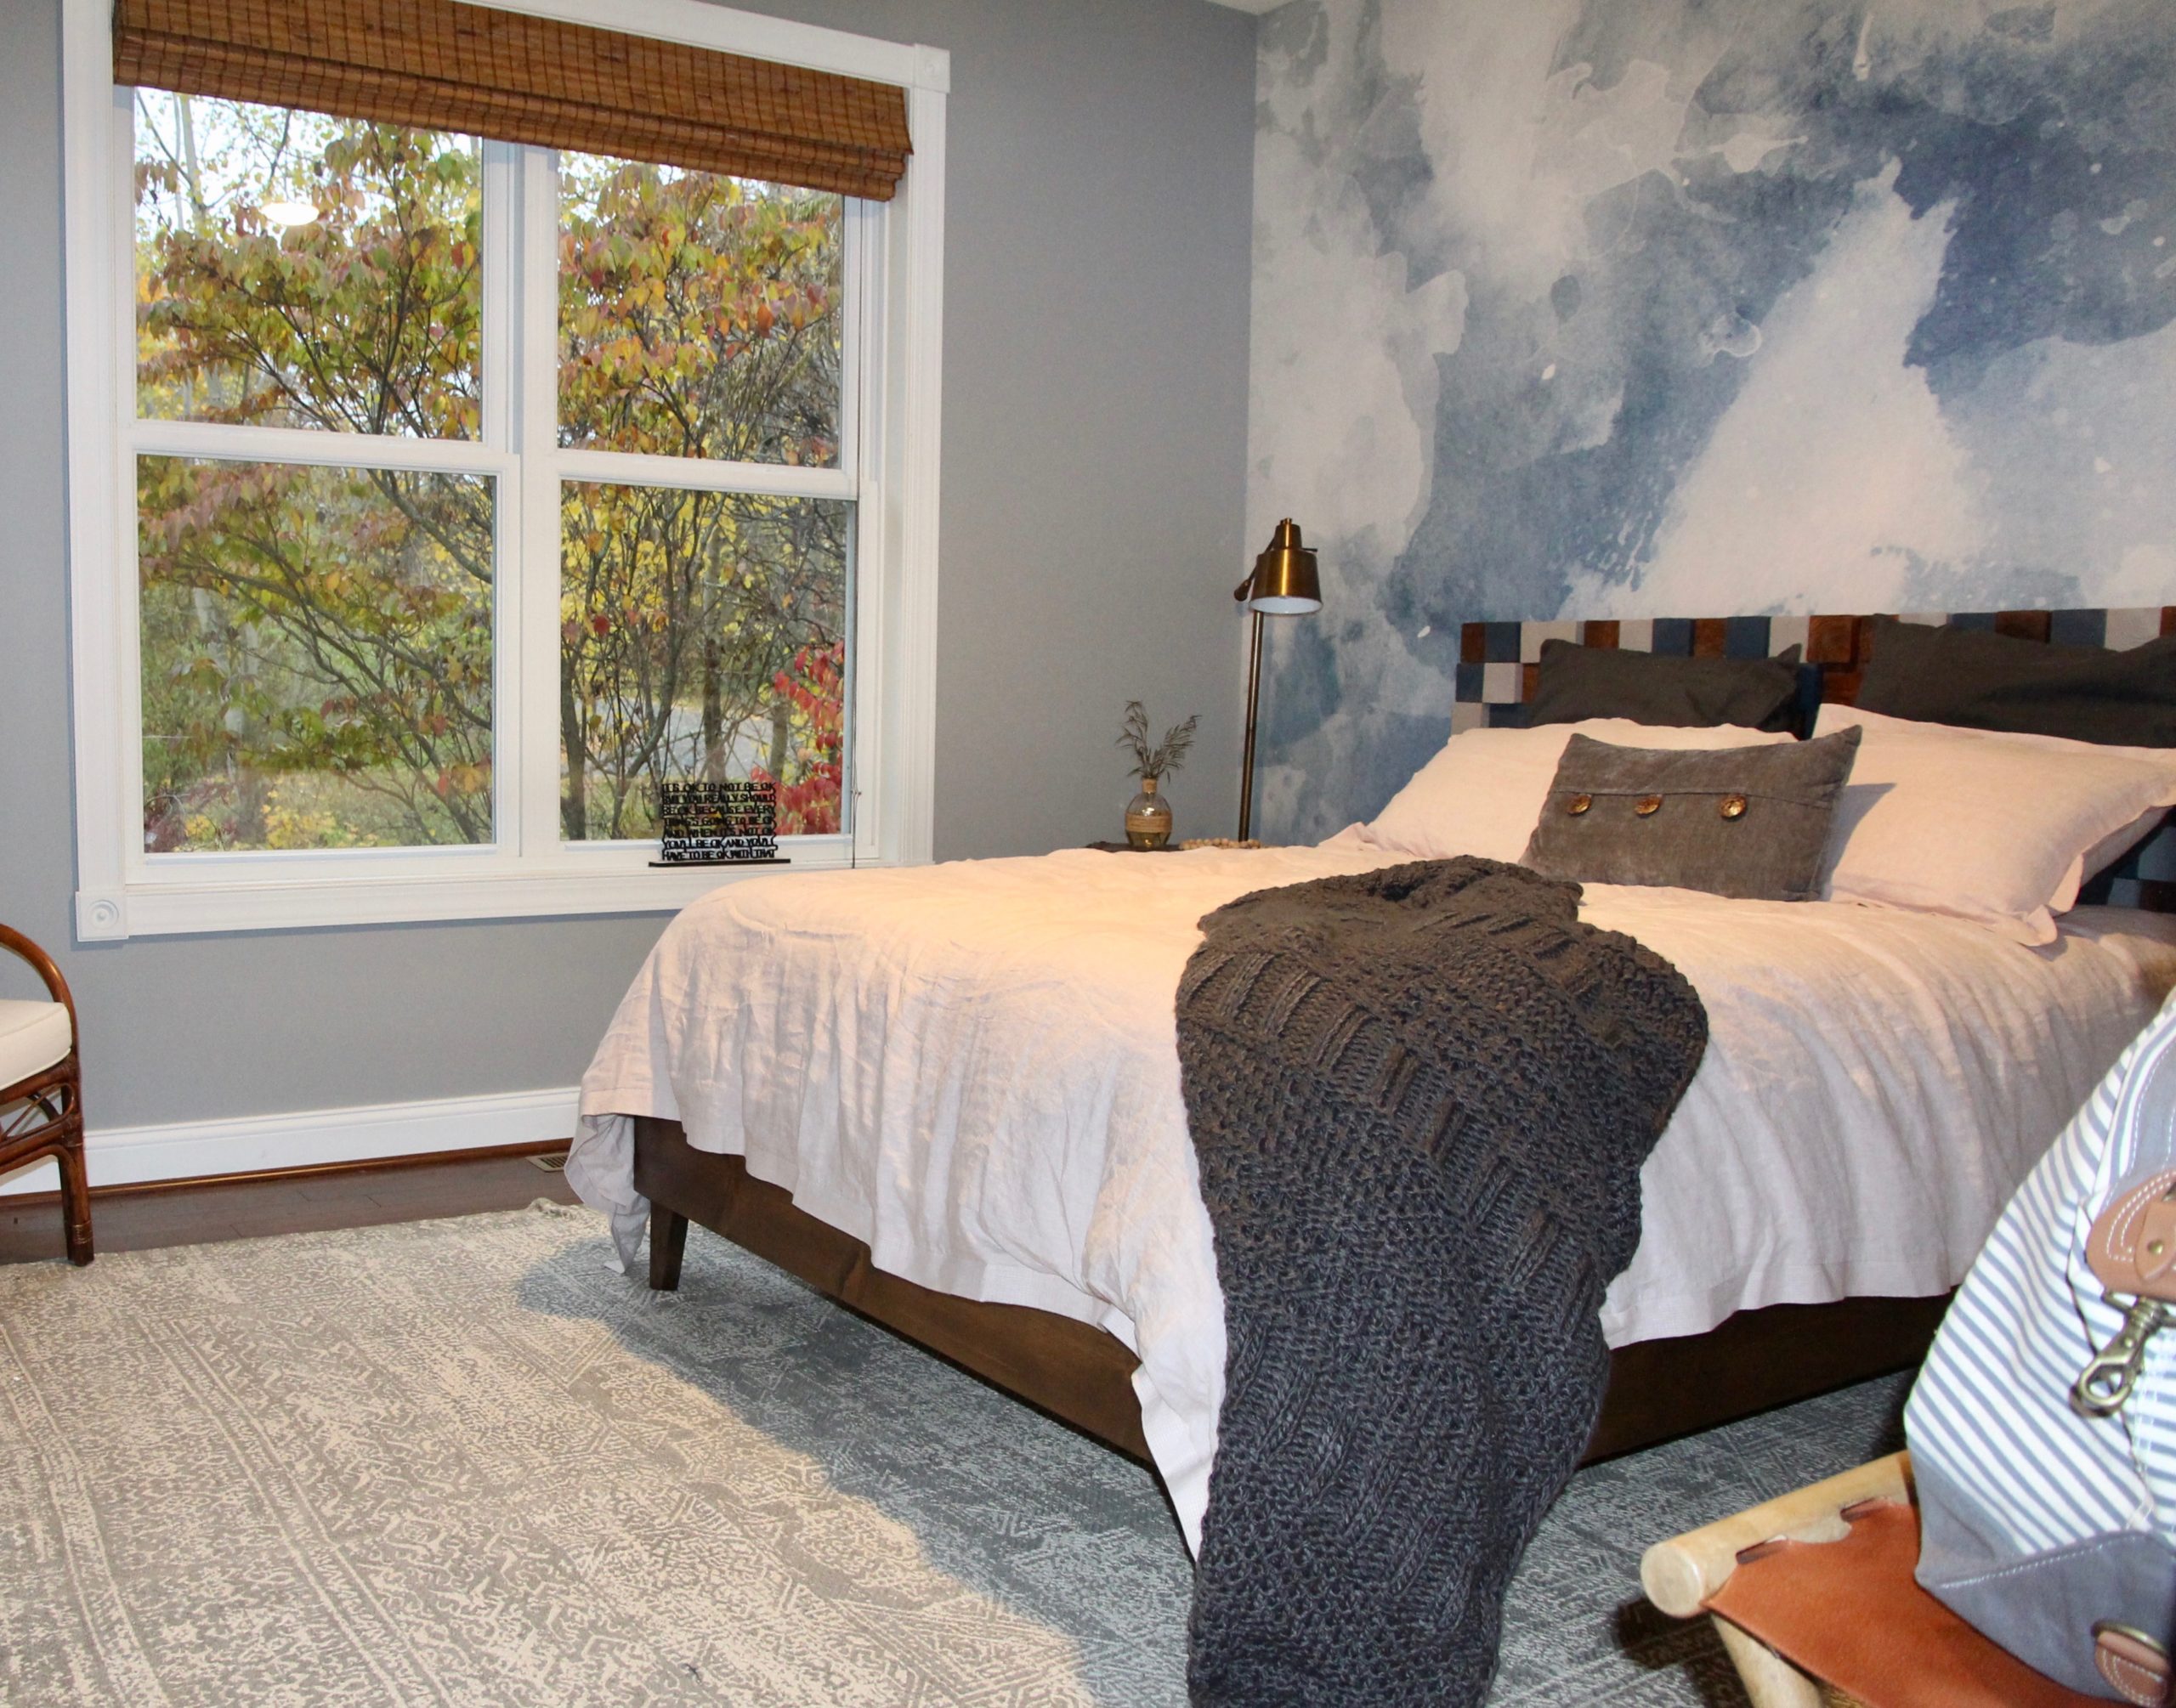 Guest Room with wall mural and bedding